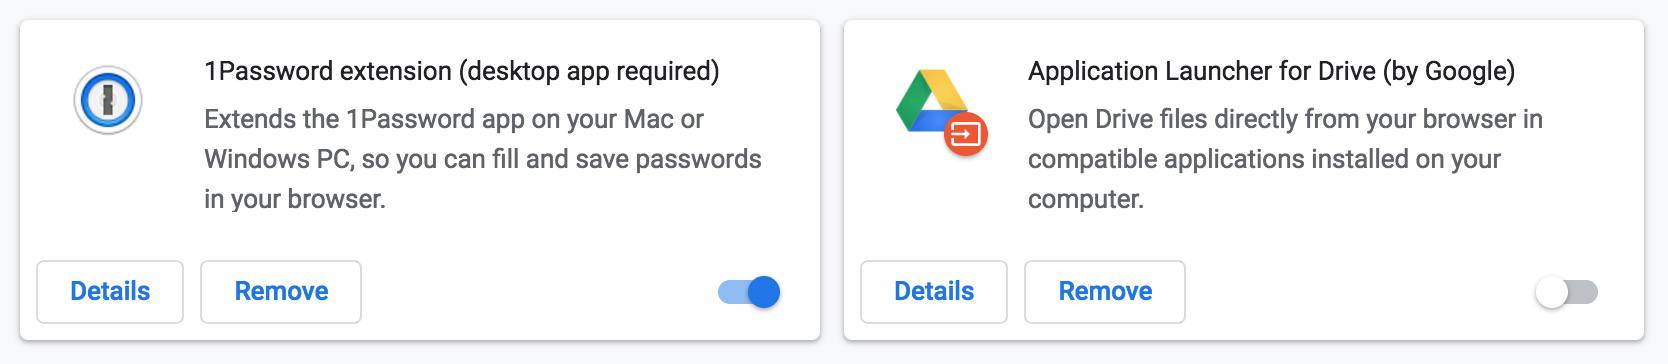 1Password Toggle in Chrome showing extension enabled